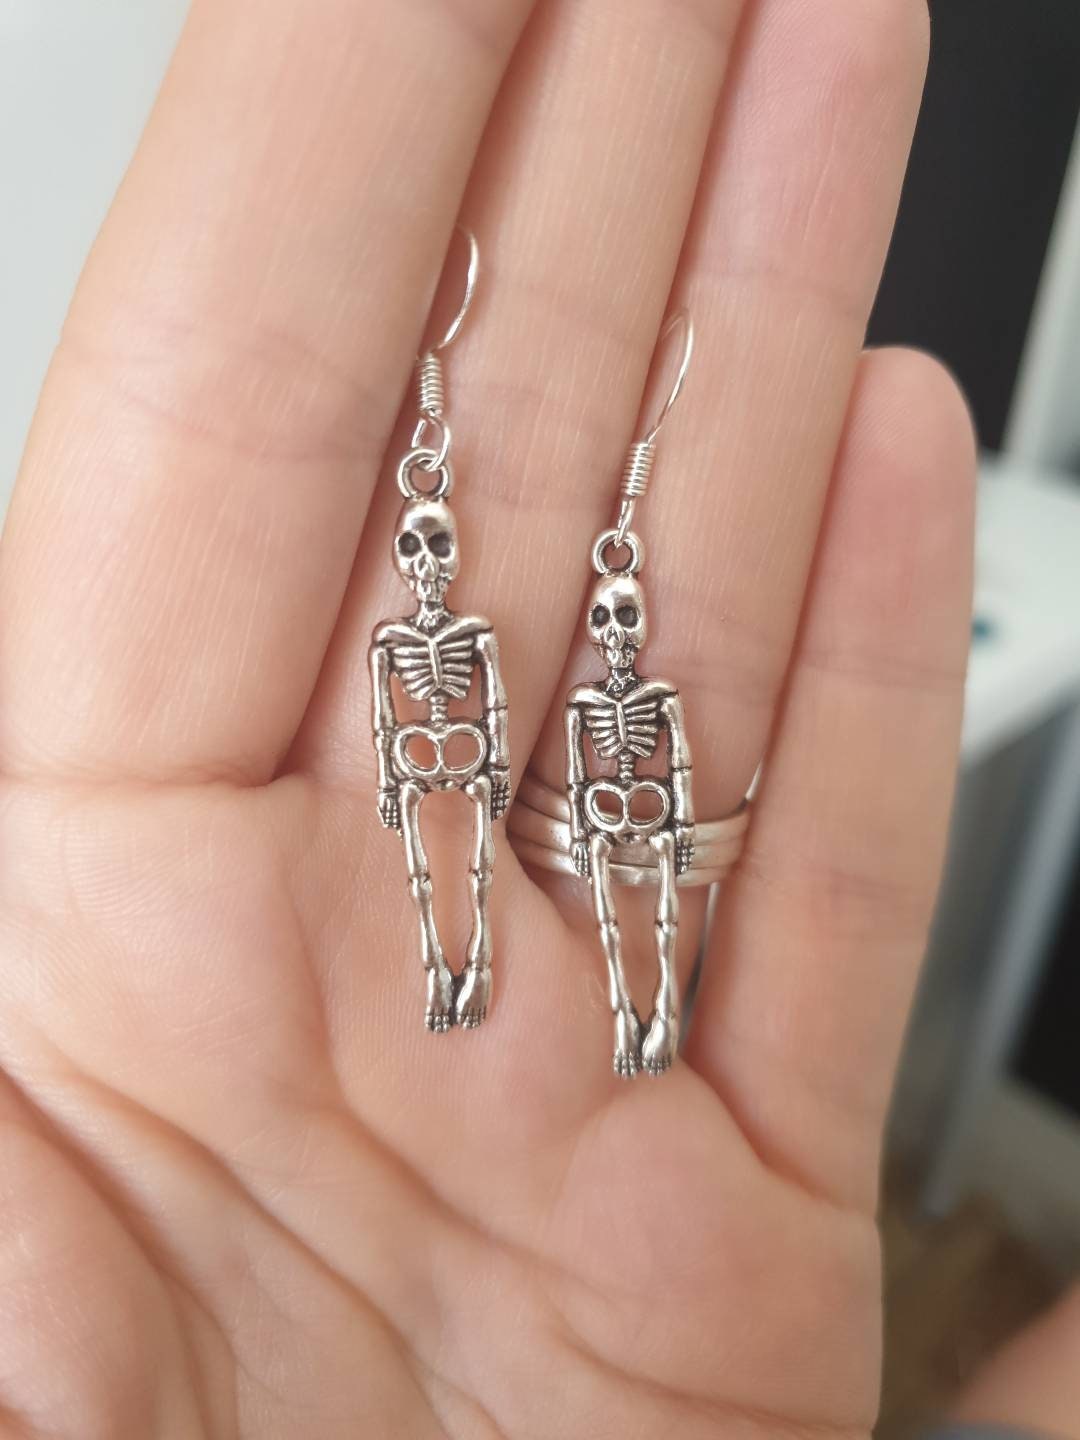 Handmade Antique Silver Skeleton Dangly Charm Earrings In Gift Bag, Halloween Jewellery - Premium  from Etsy - Just £4.99! Shop now at Uniquely Holt